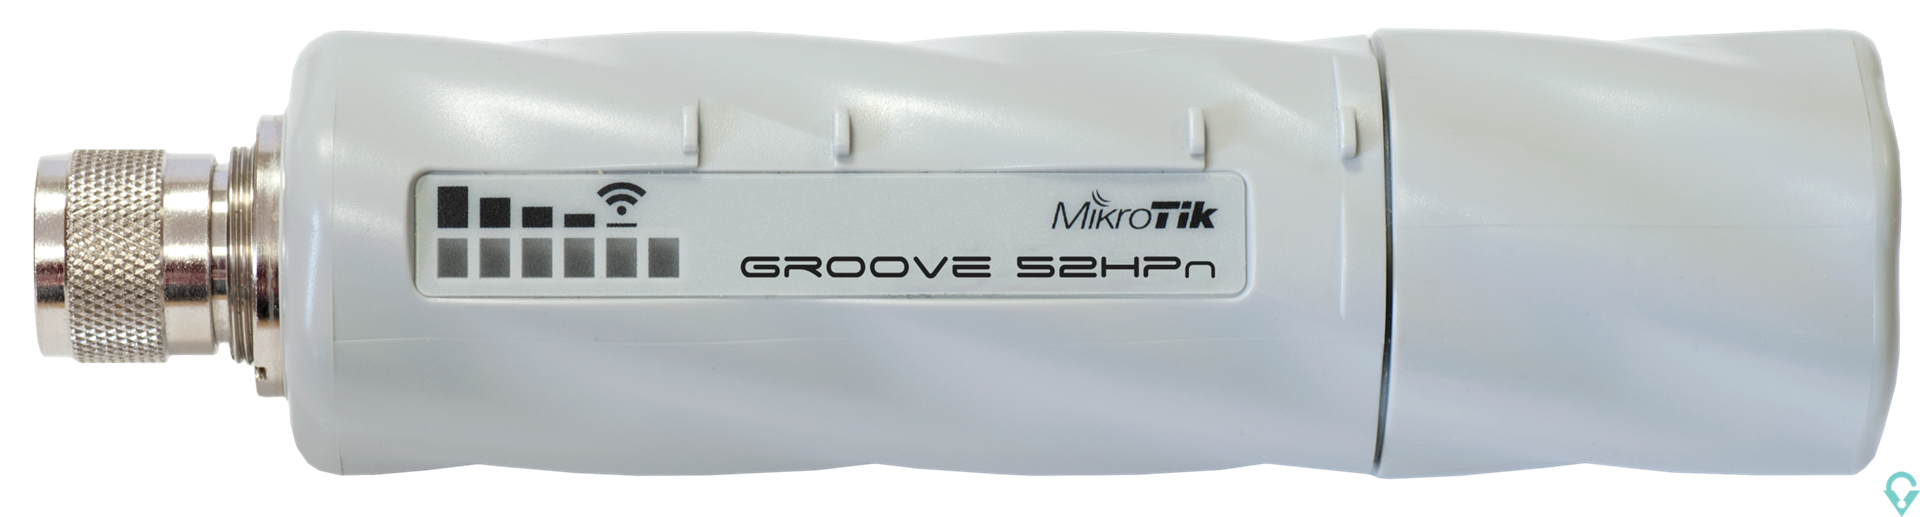 Picture of RBGrooveA-52HPn GrooveA 52 with N-male connector, High Gain Single Chain 2.4GHz / 5GHz 802.11abgn wireless, 600MHz CPU, 64MB RAM